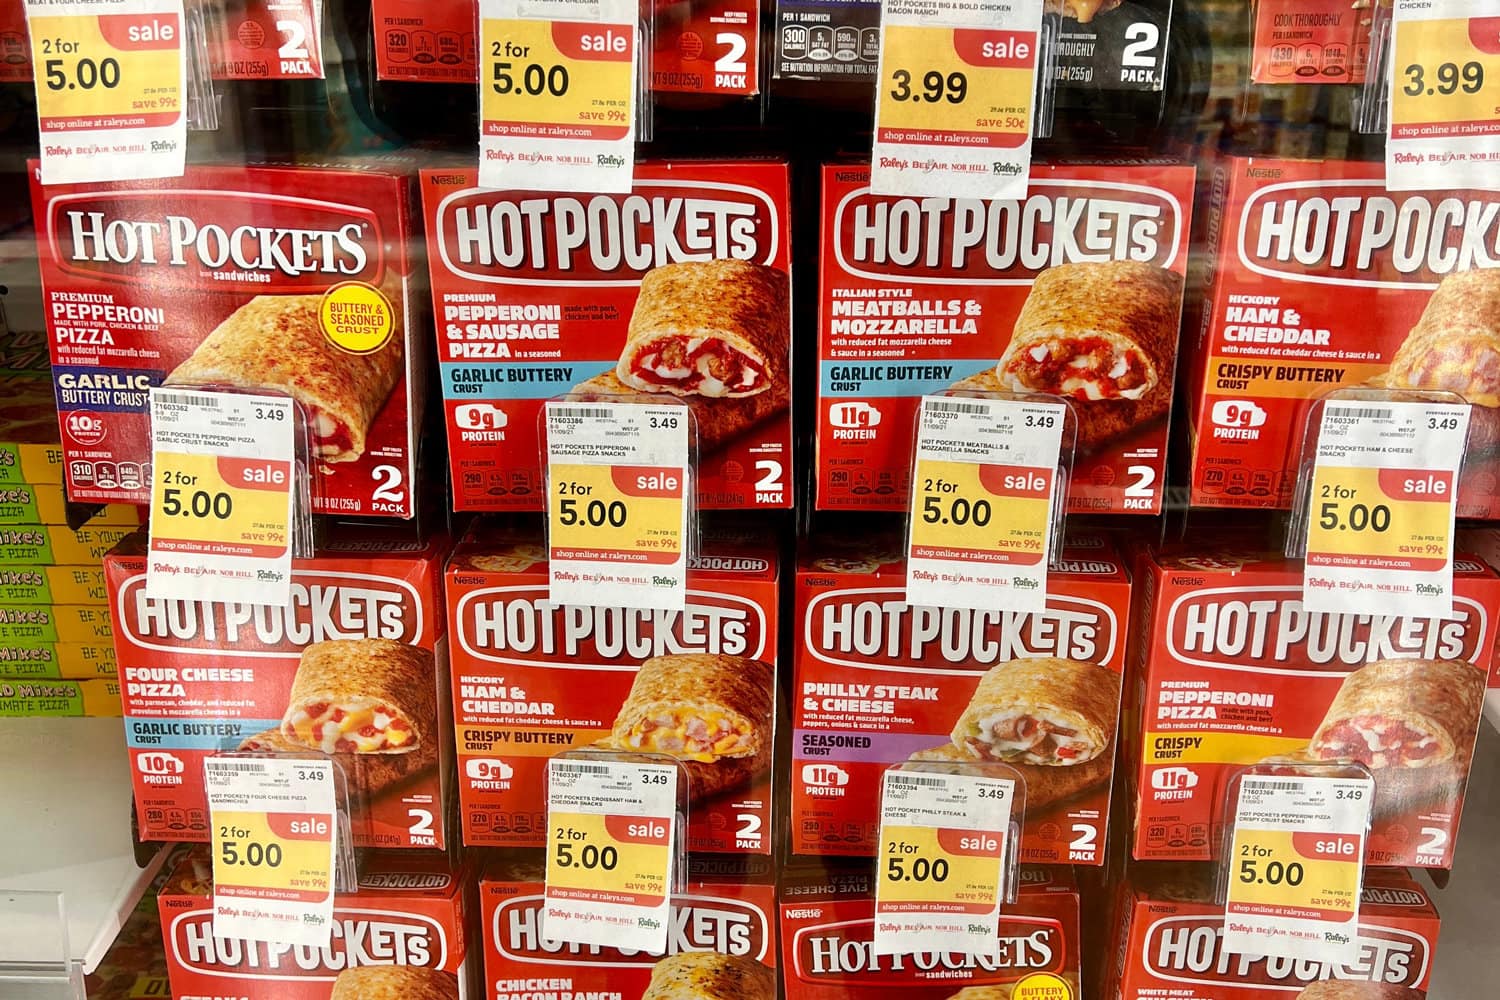 Boxes of Hot Pockets on sale behind a glass inside a freezer.